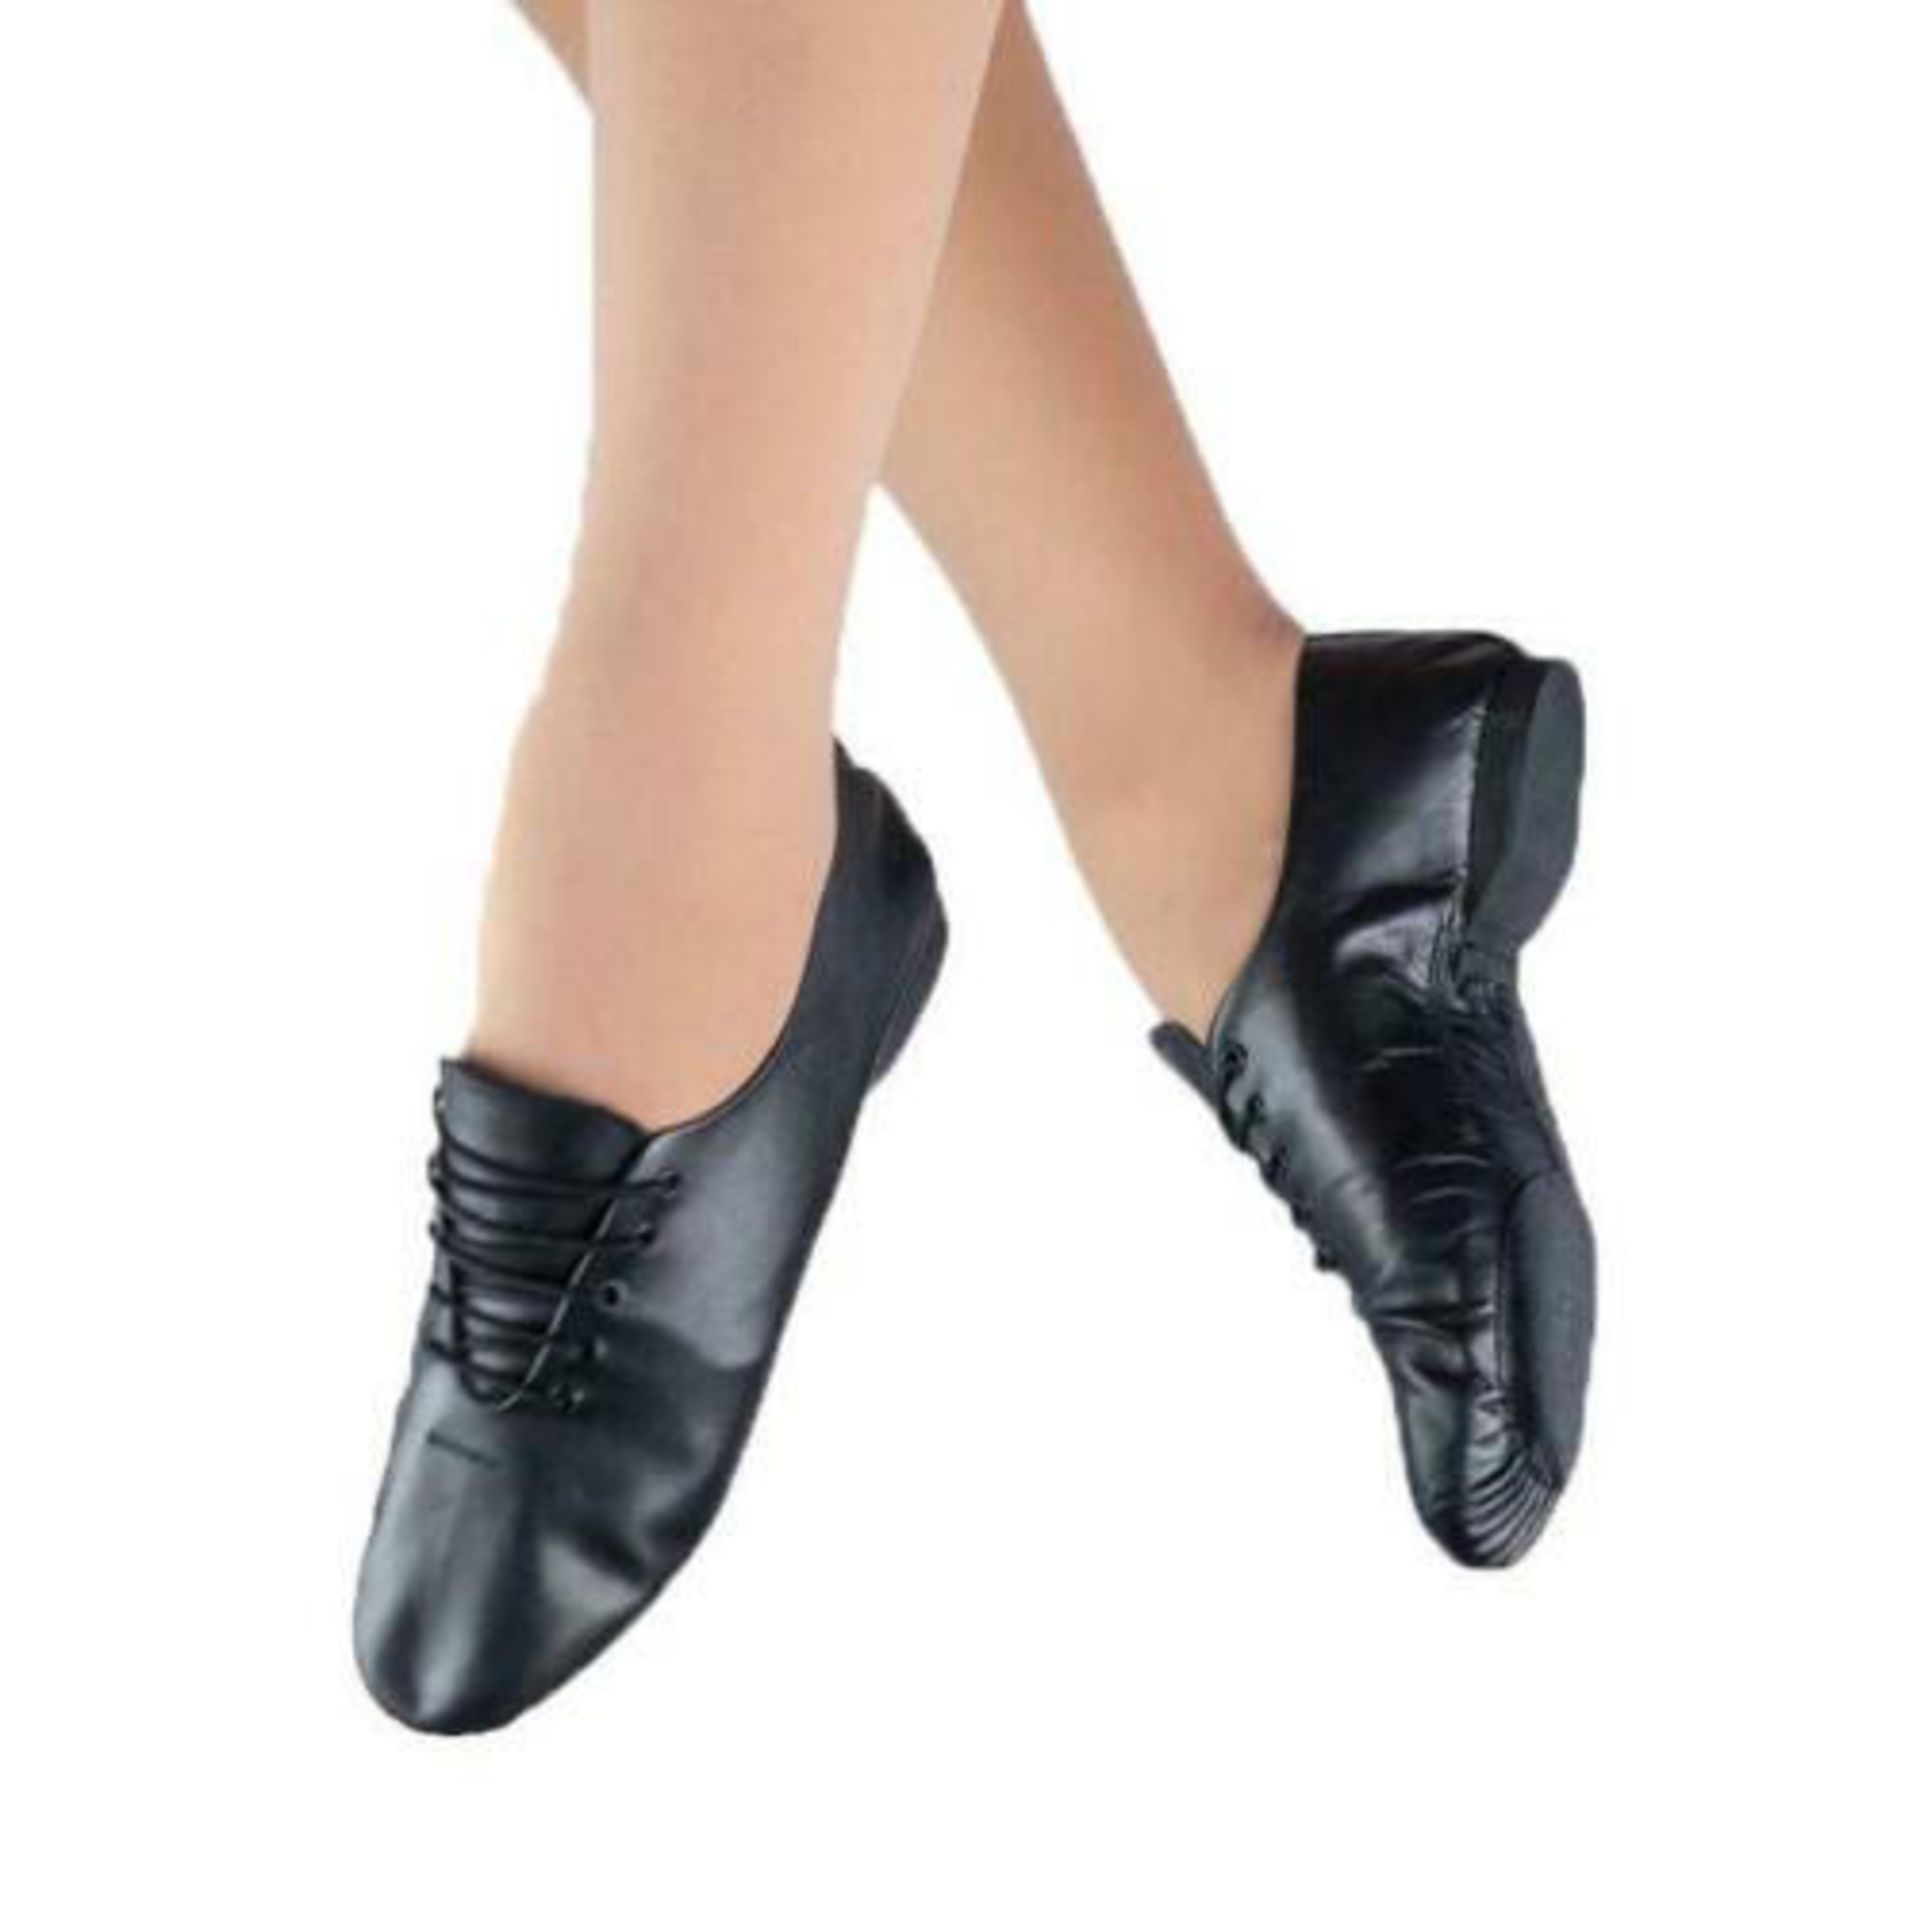 30 X CHILDRENS DANCE DEPOT LEATHER SPLIT SOLE JAZZ SHOES IN VARIOUS SIZES BLACK - Image 2 of 2